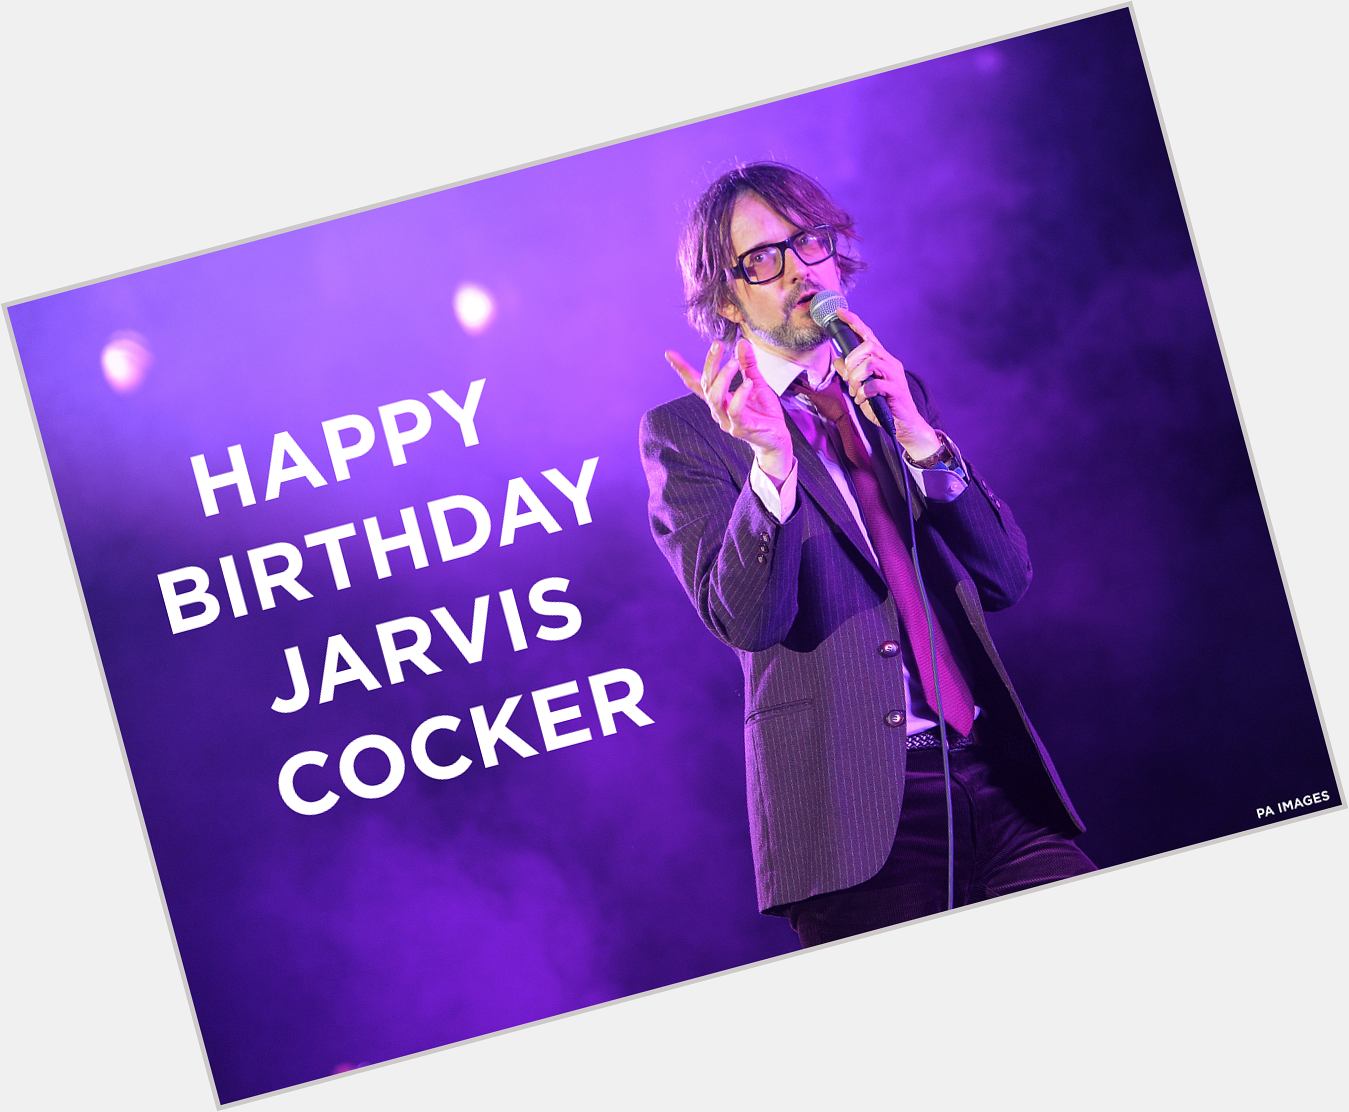 Happy Birthday to Jarvis Cocker!
What is your favouirte Pulp song?
We have a trio of Cocker songs in the Indie Disco. 